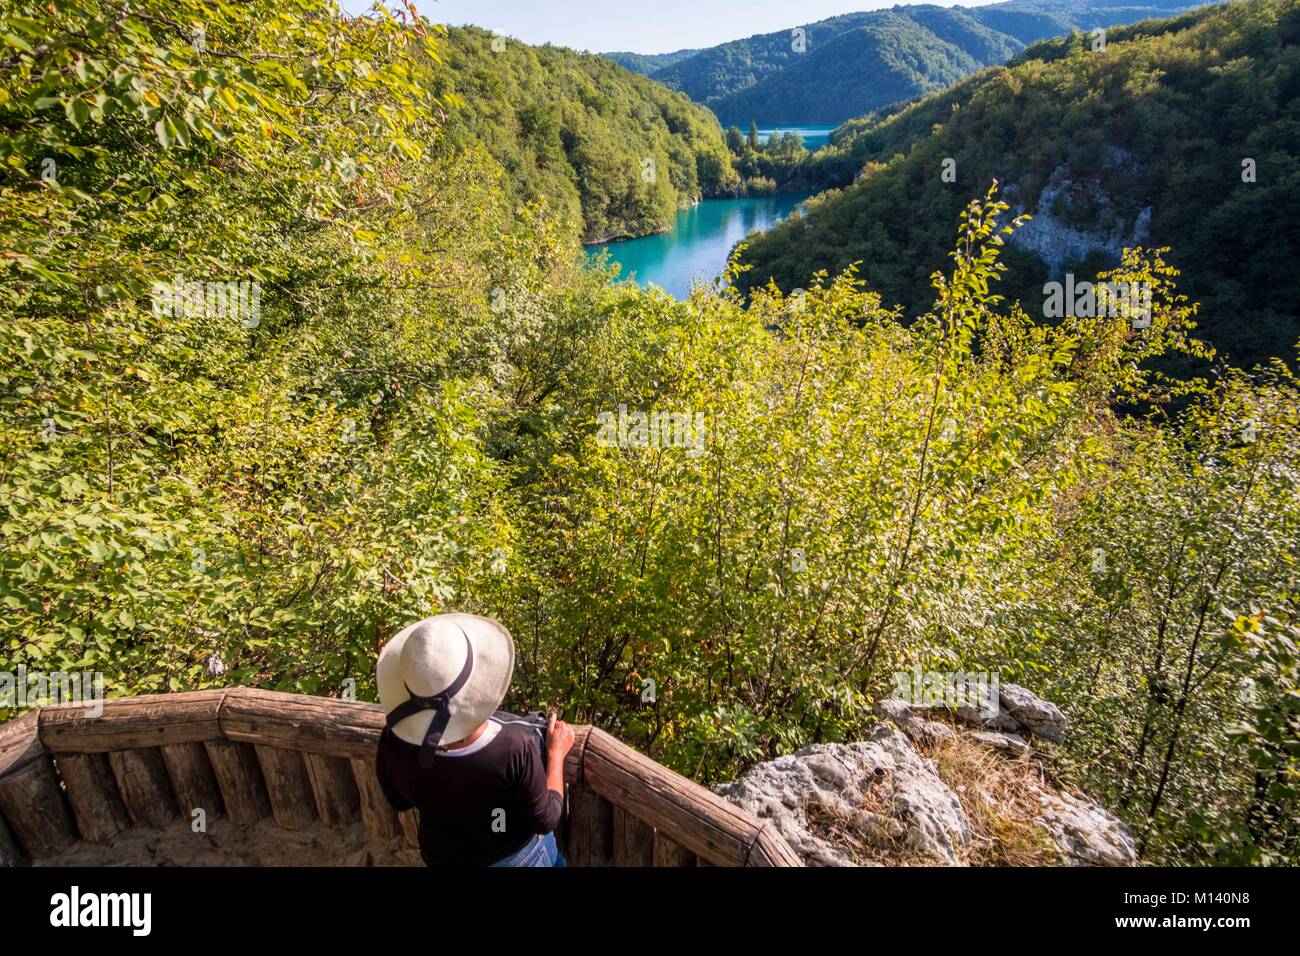 Croatia, North Dalmatia, Plitvice Lakes National Park listed as World Heritage by UNESCO, Lower lakes Stock Photo